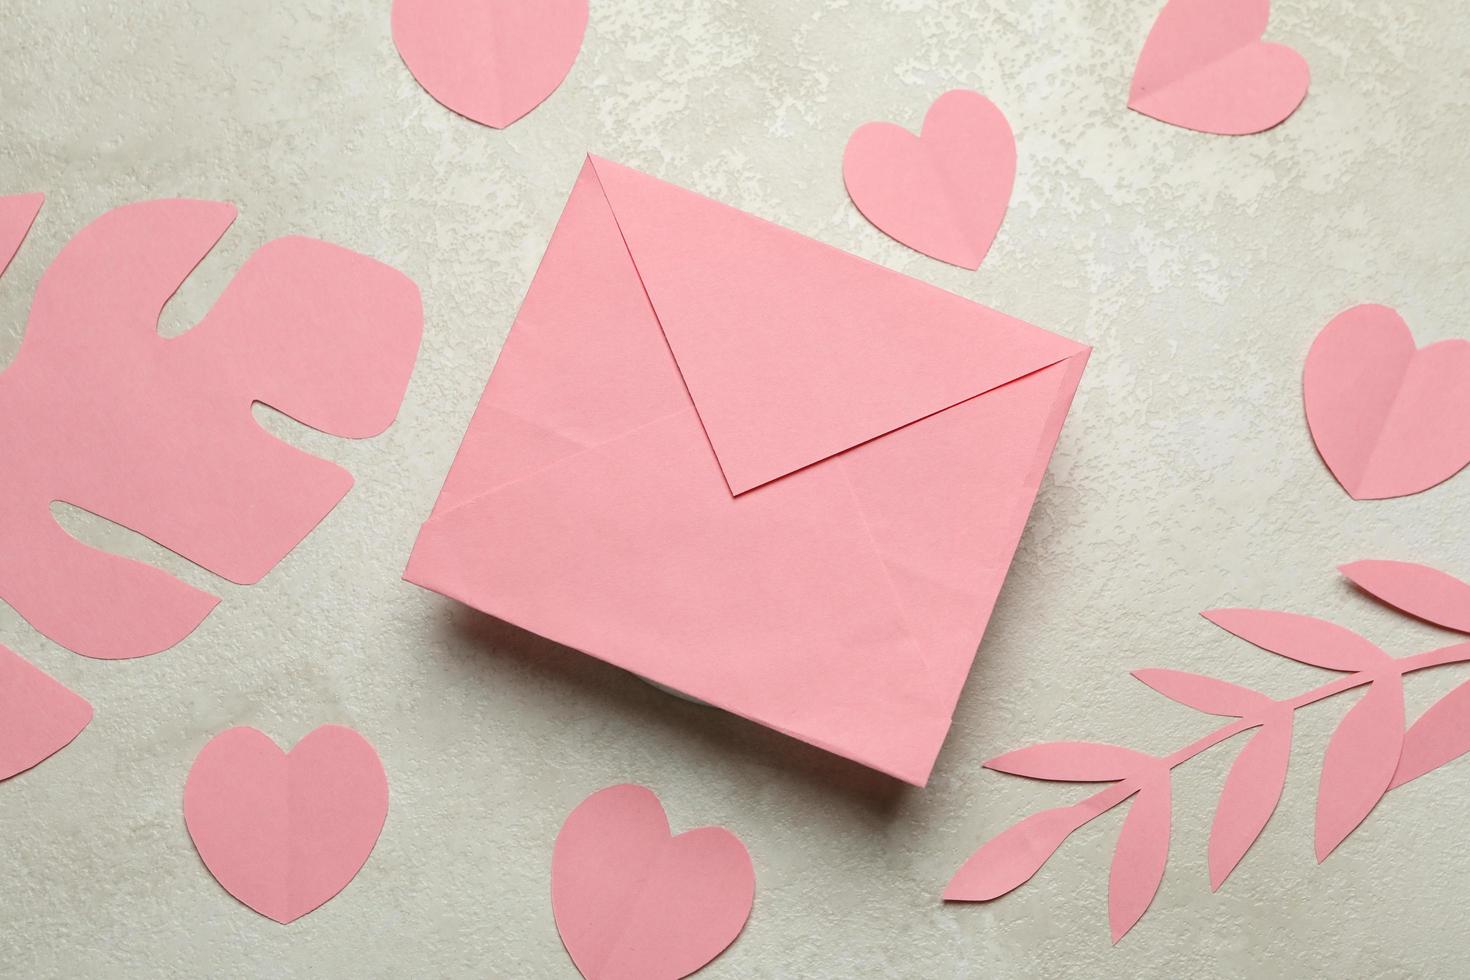 Envelope, paper leaves and hearts on white textured background photo